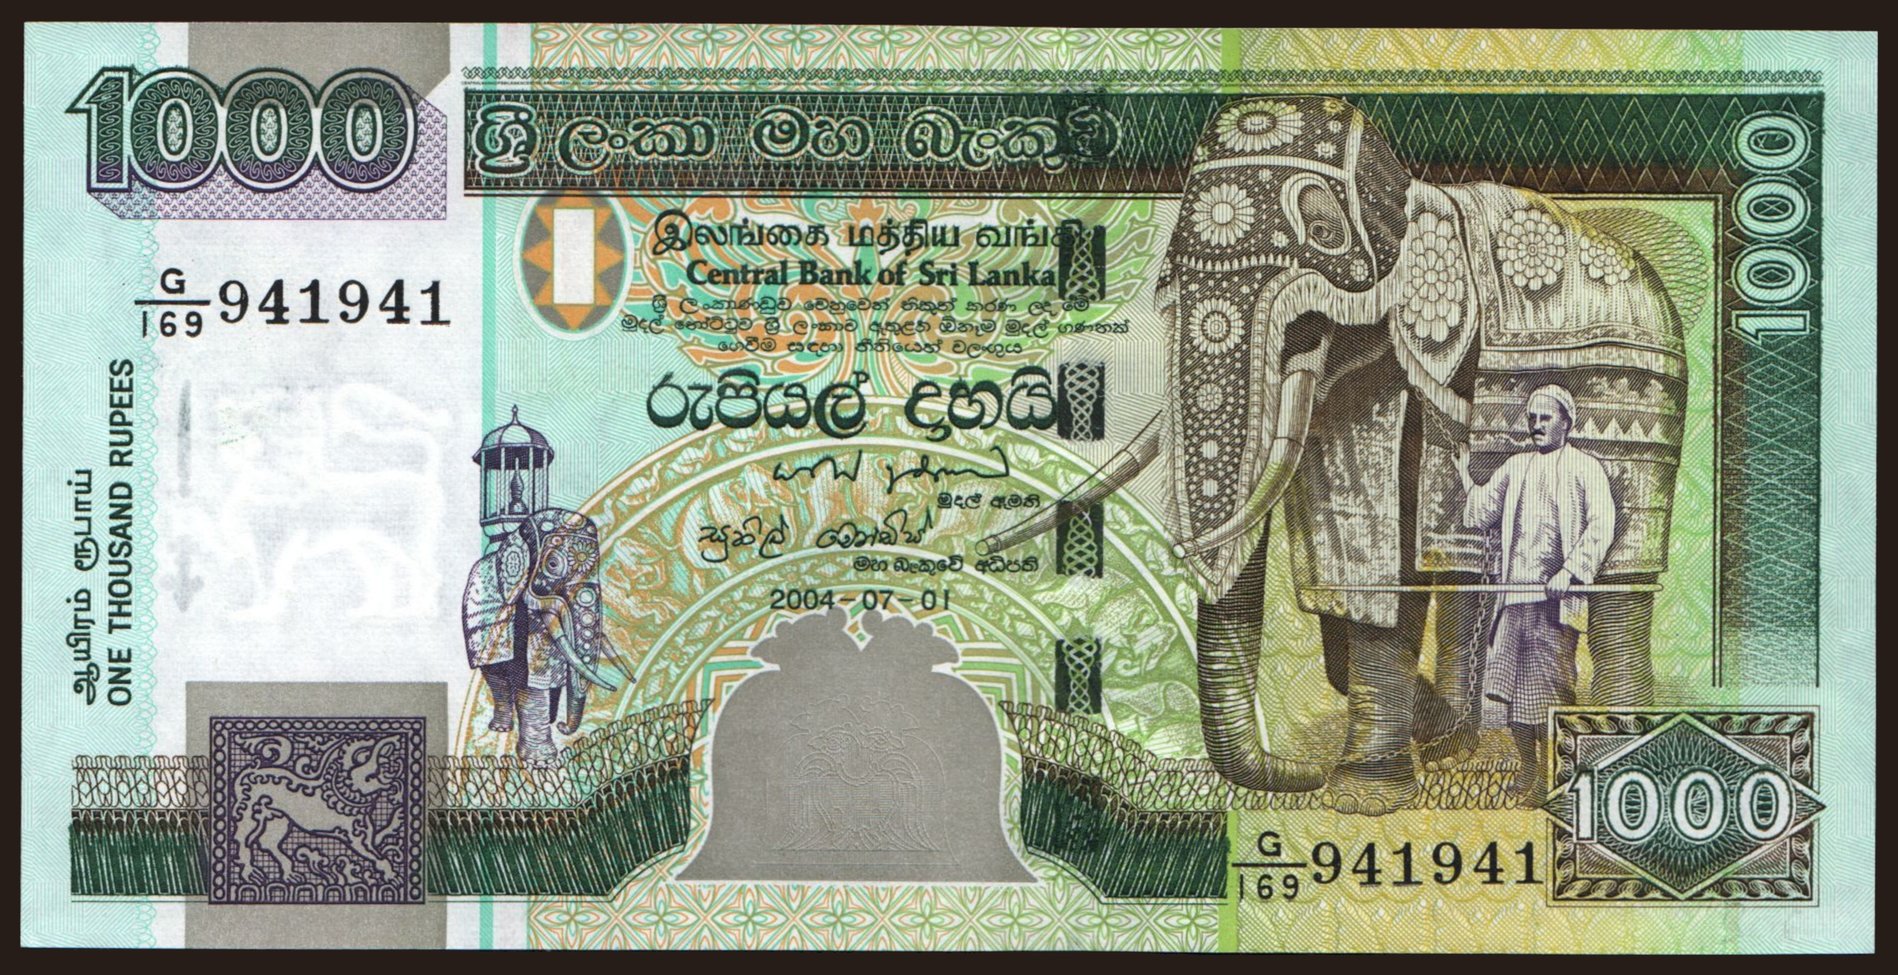 1000 rupees, 2004